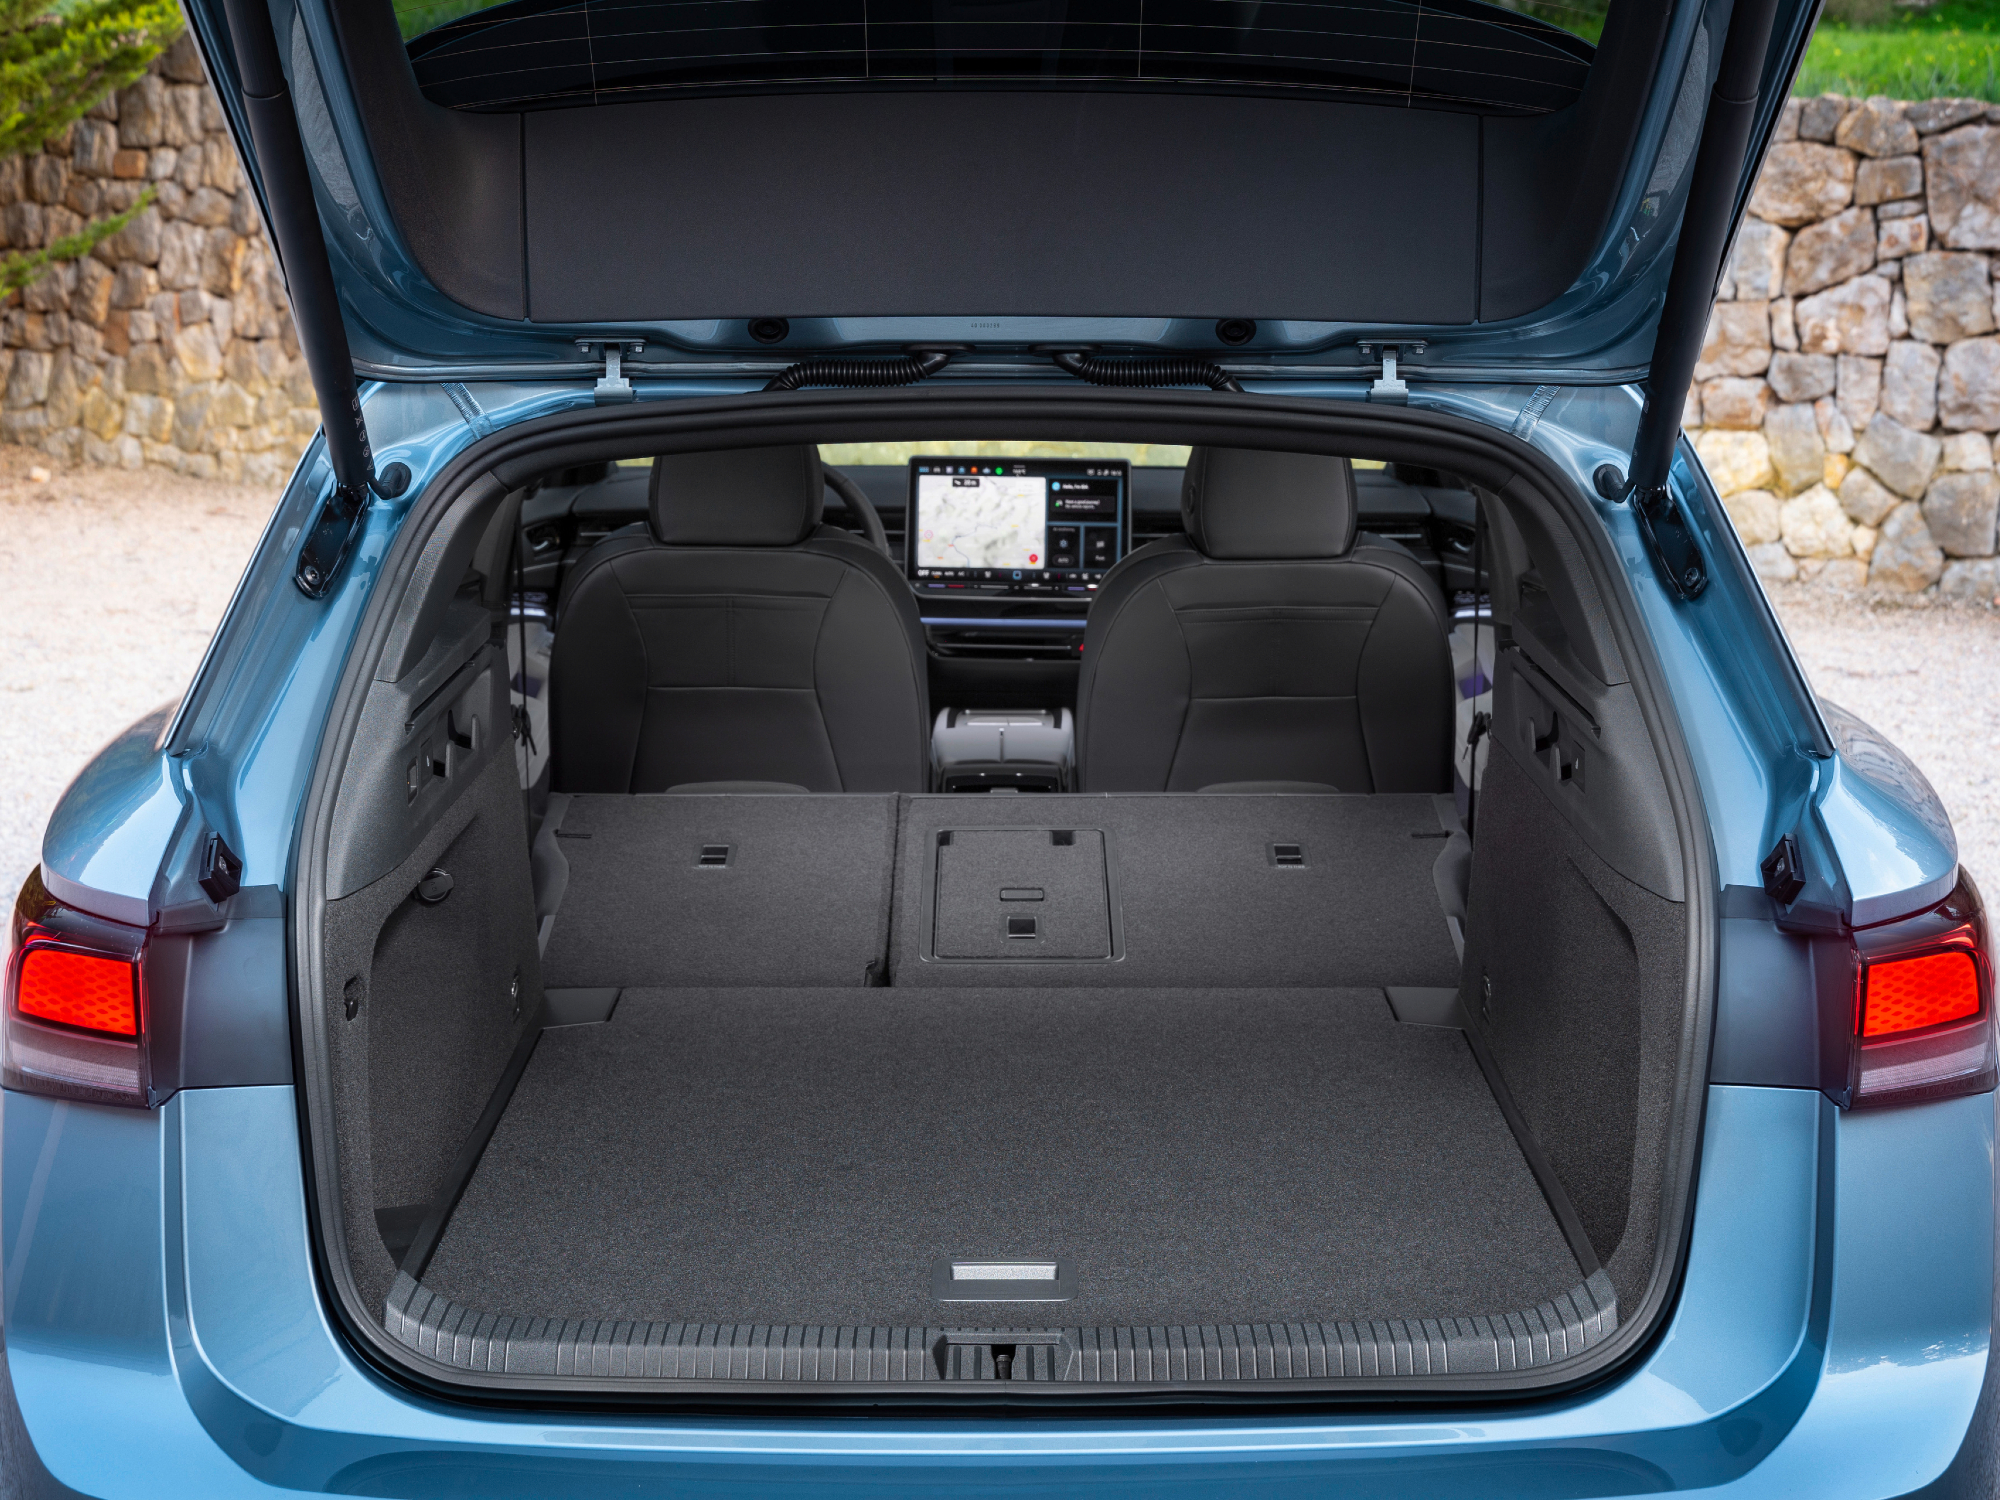 VW ID.7 concept cargo space behind front seats.